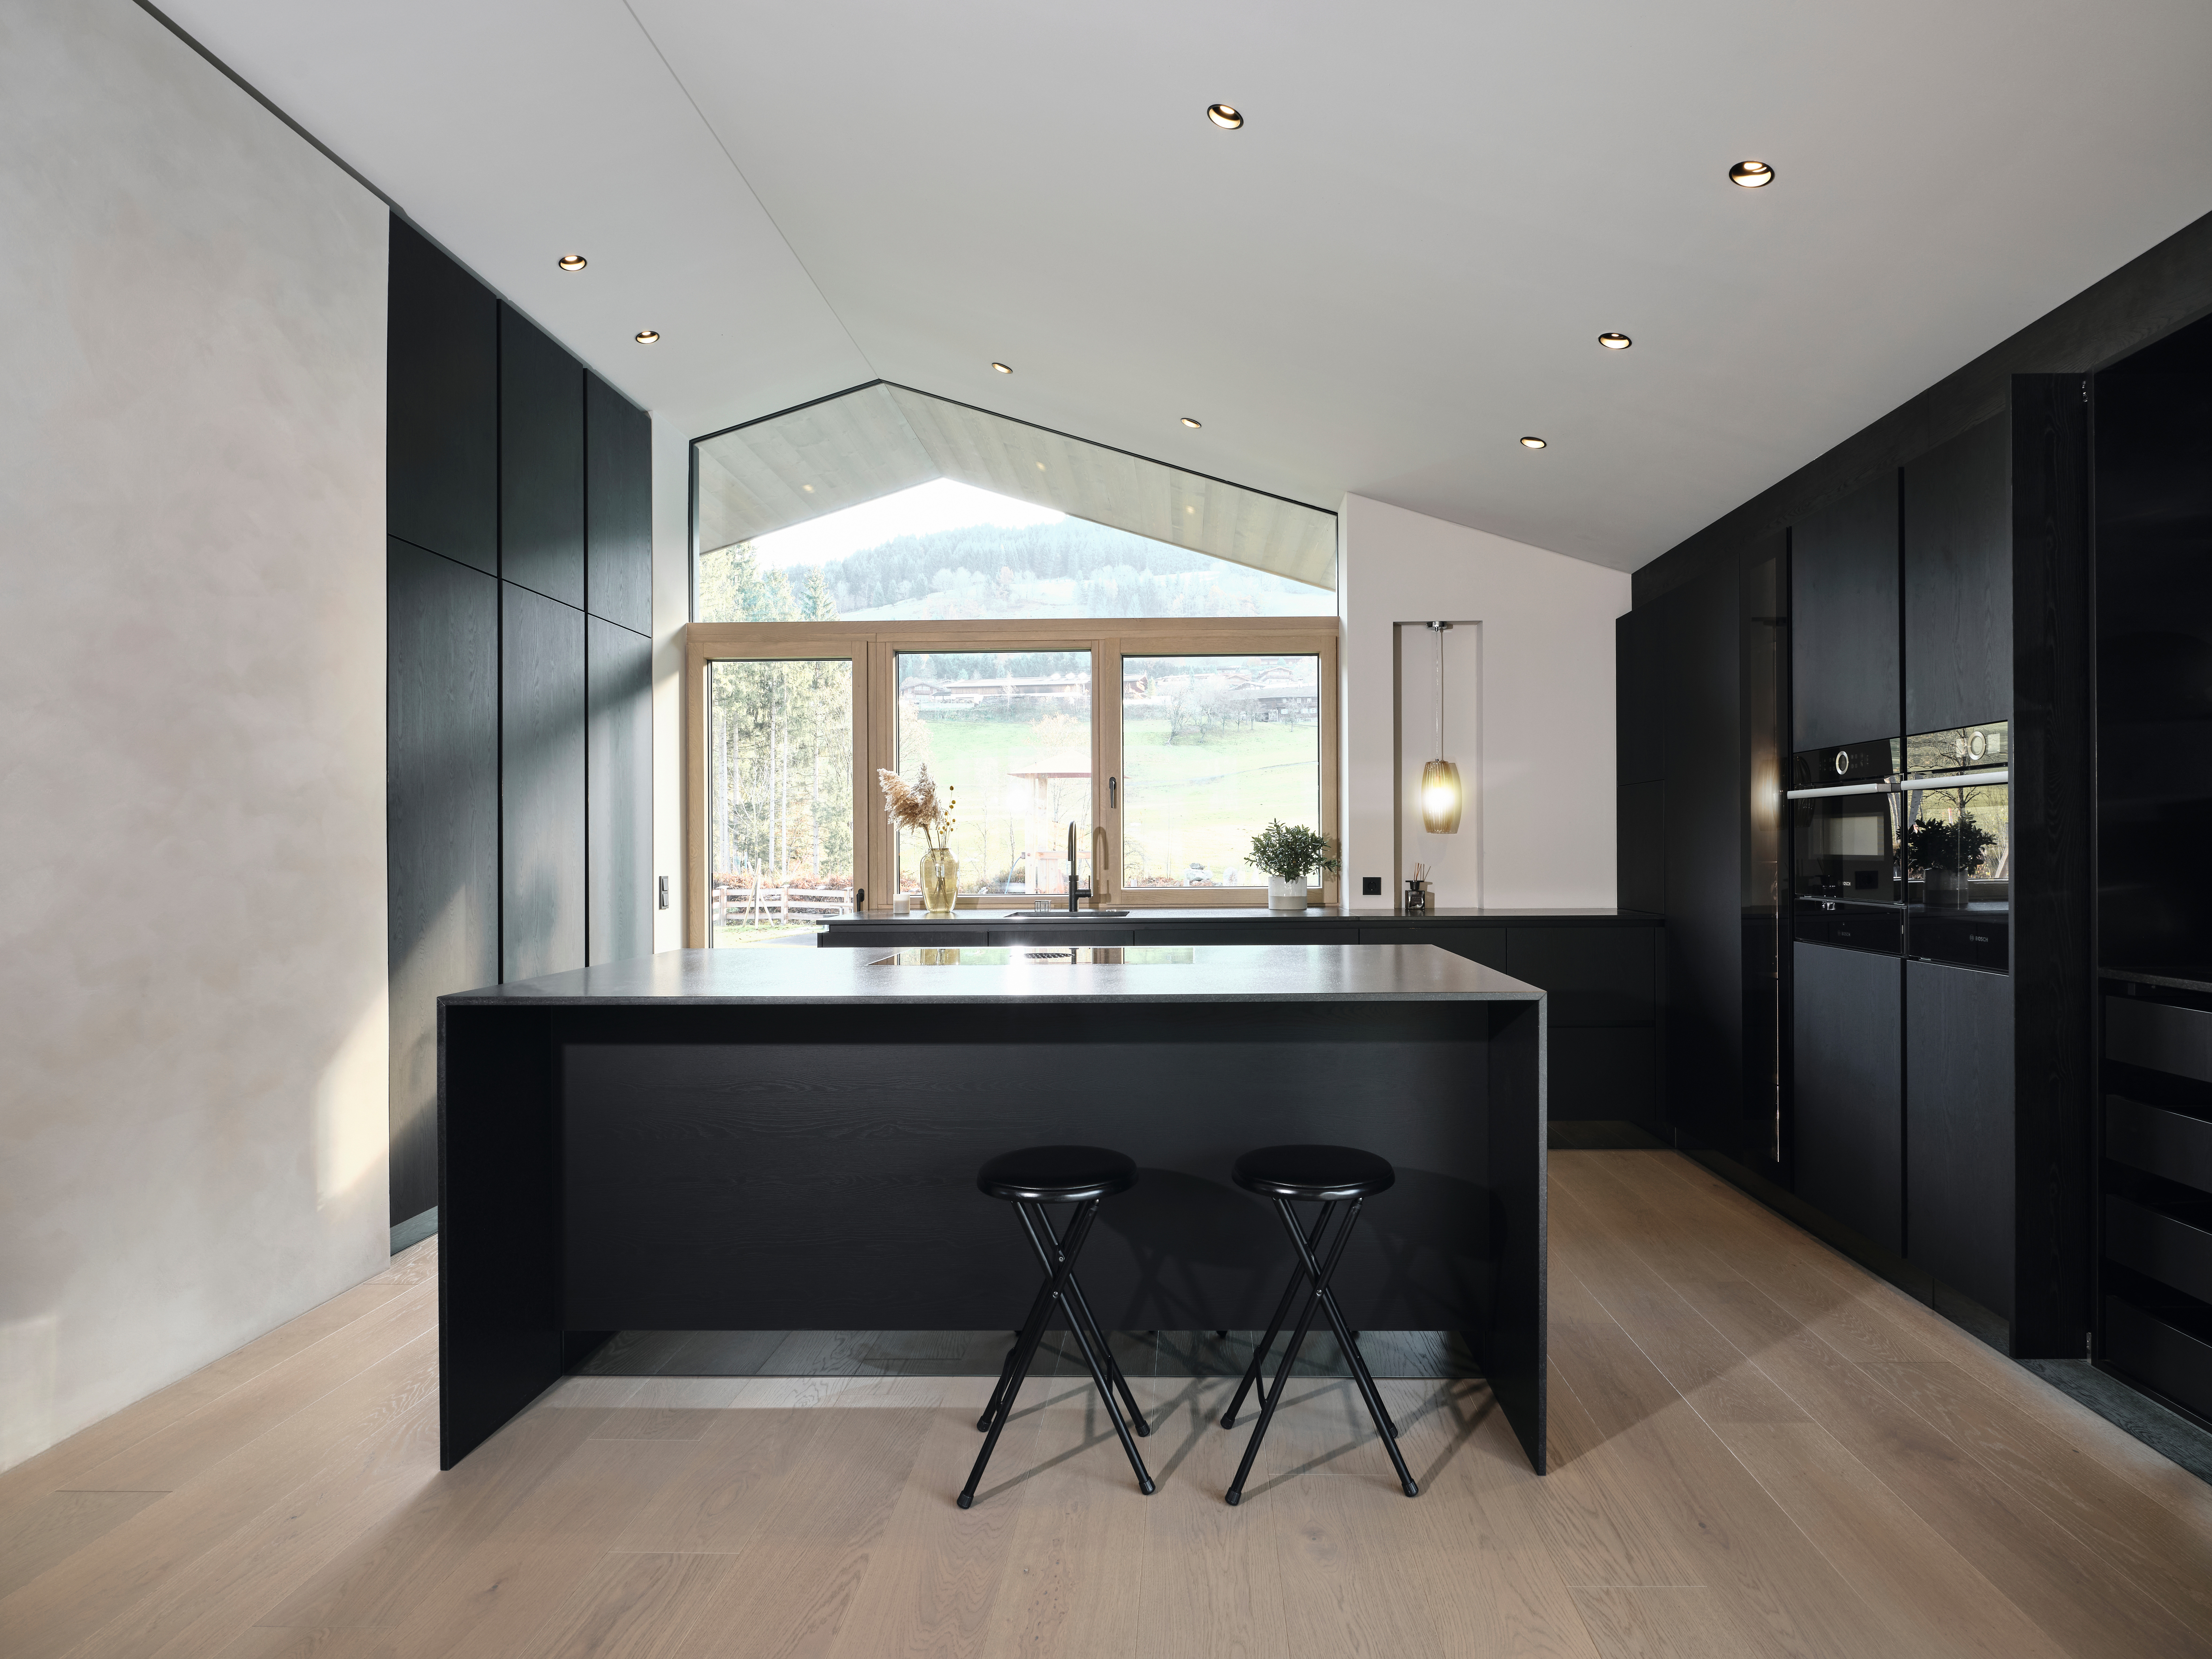 The special reflective nature of PerfectSense Feelwood U999 TM28 Black gives this kitchen a natural-looking elegance.